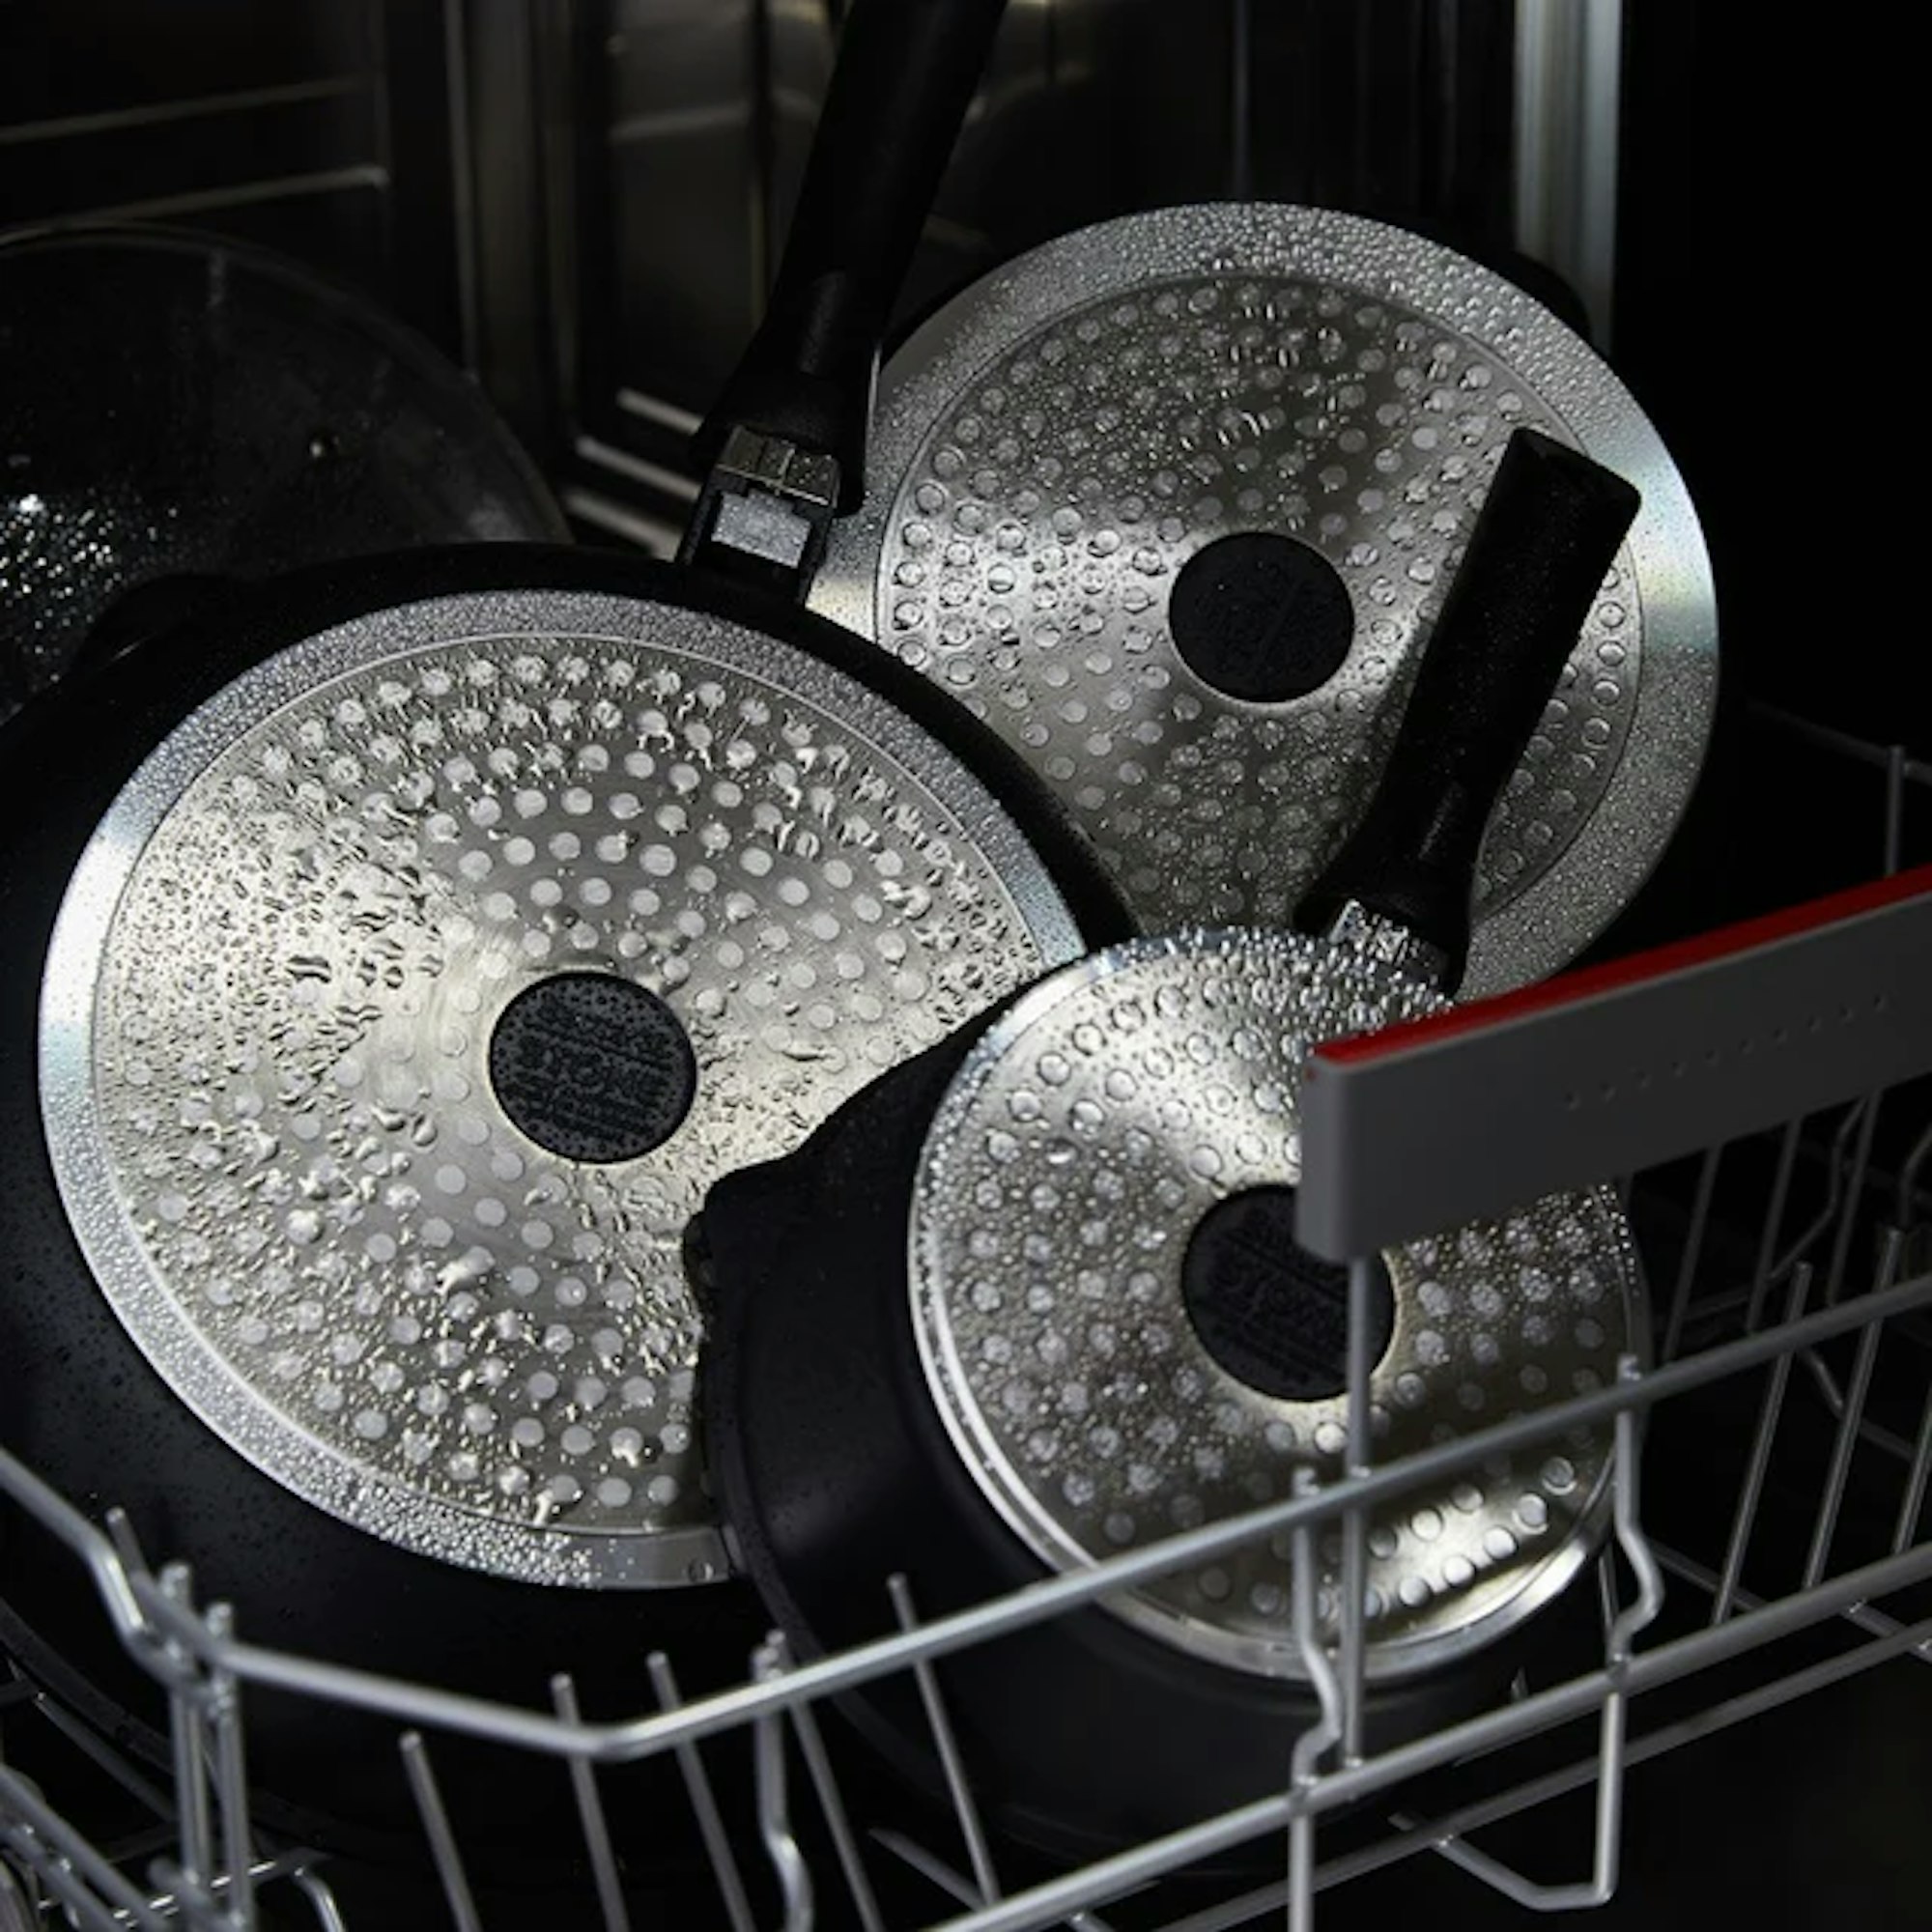 non-stick pans in a dishwasher with water